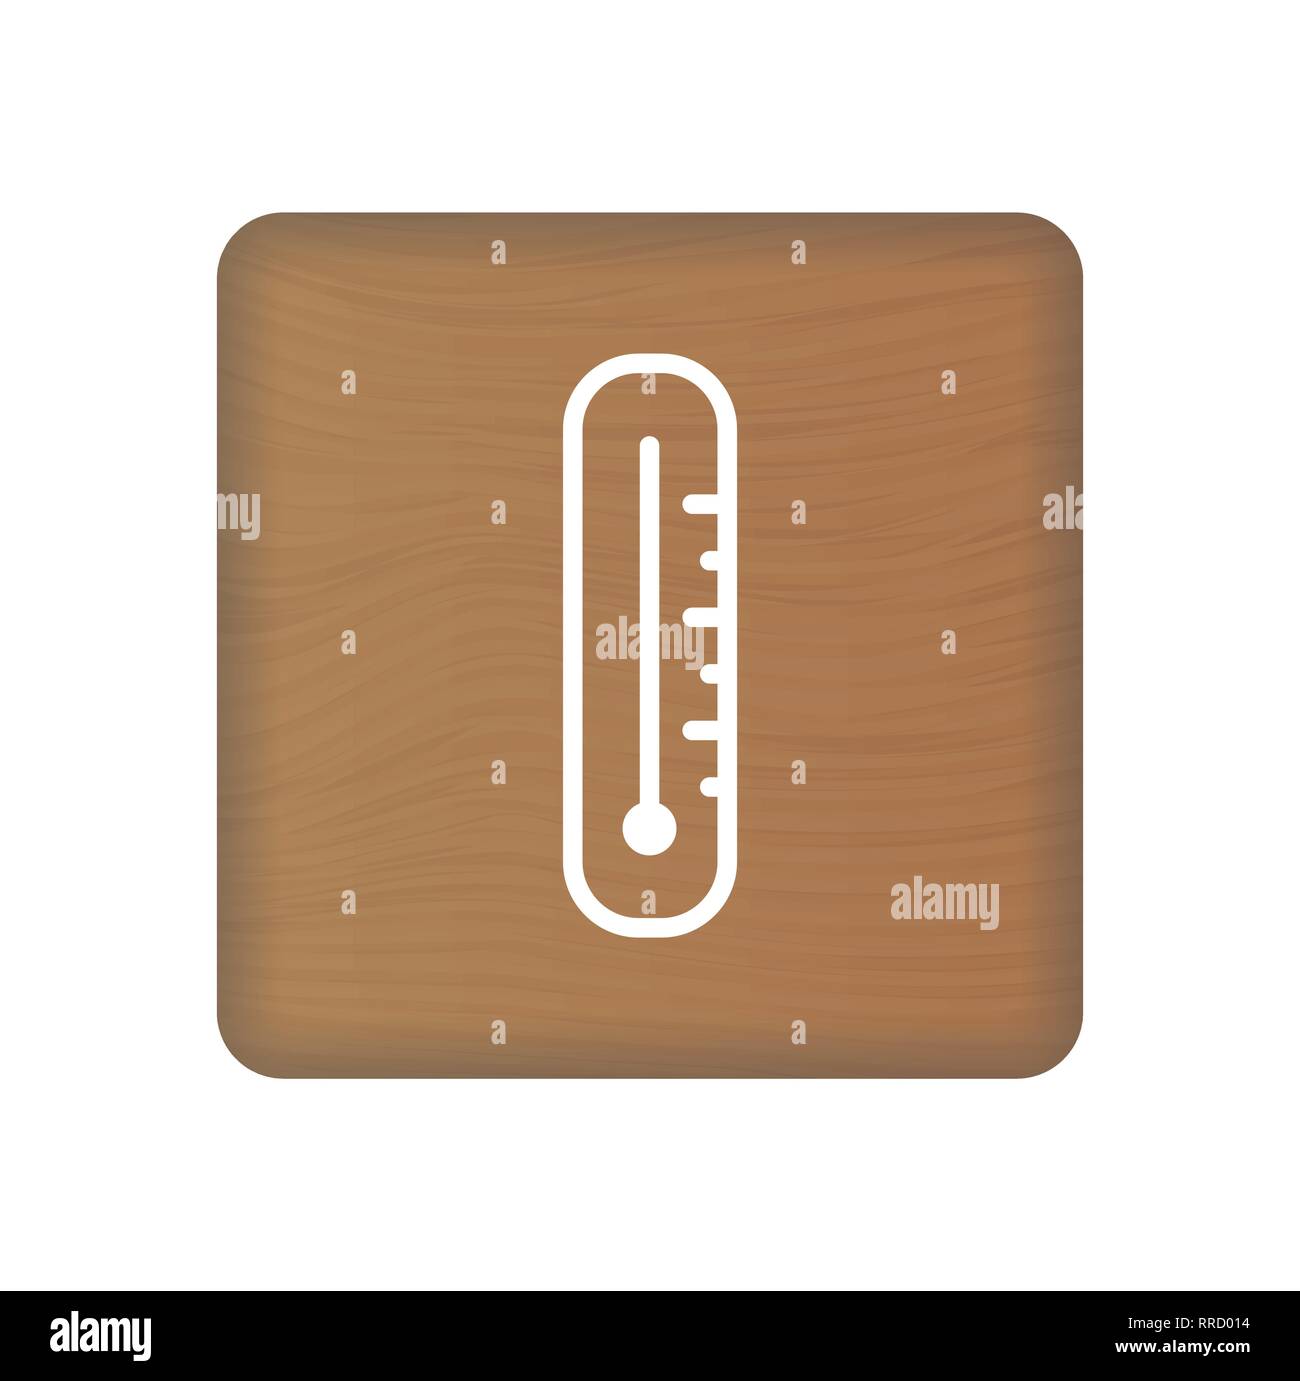 Thermometer Icon On Wooden Blocks Isolated On A White Background. Vector Illustration. Stock Vector